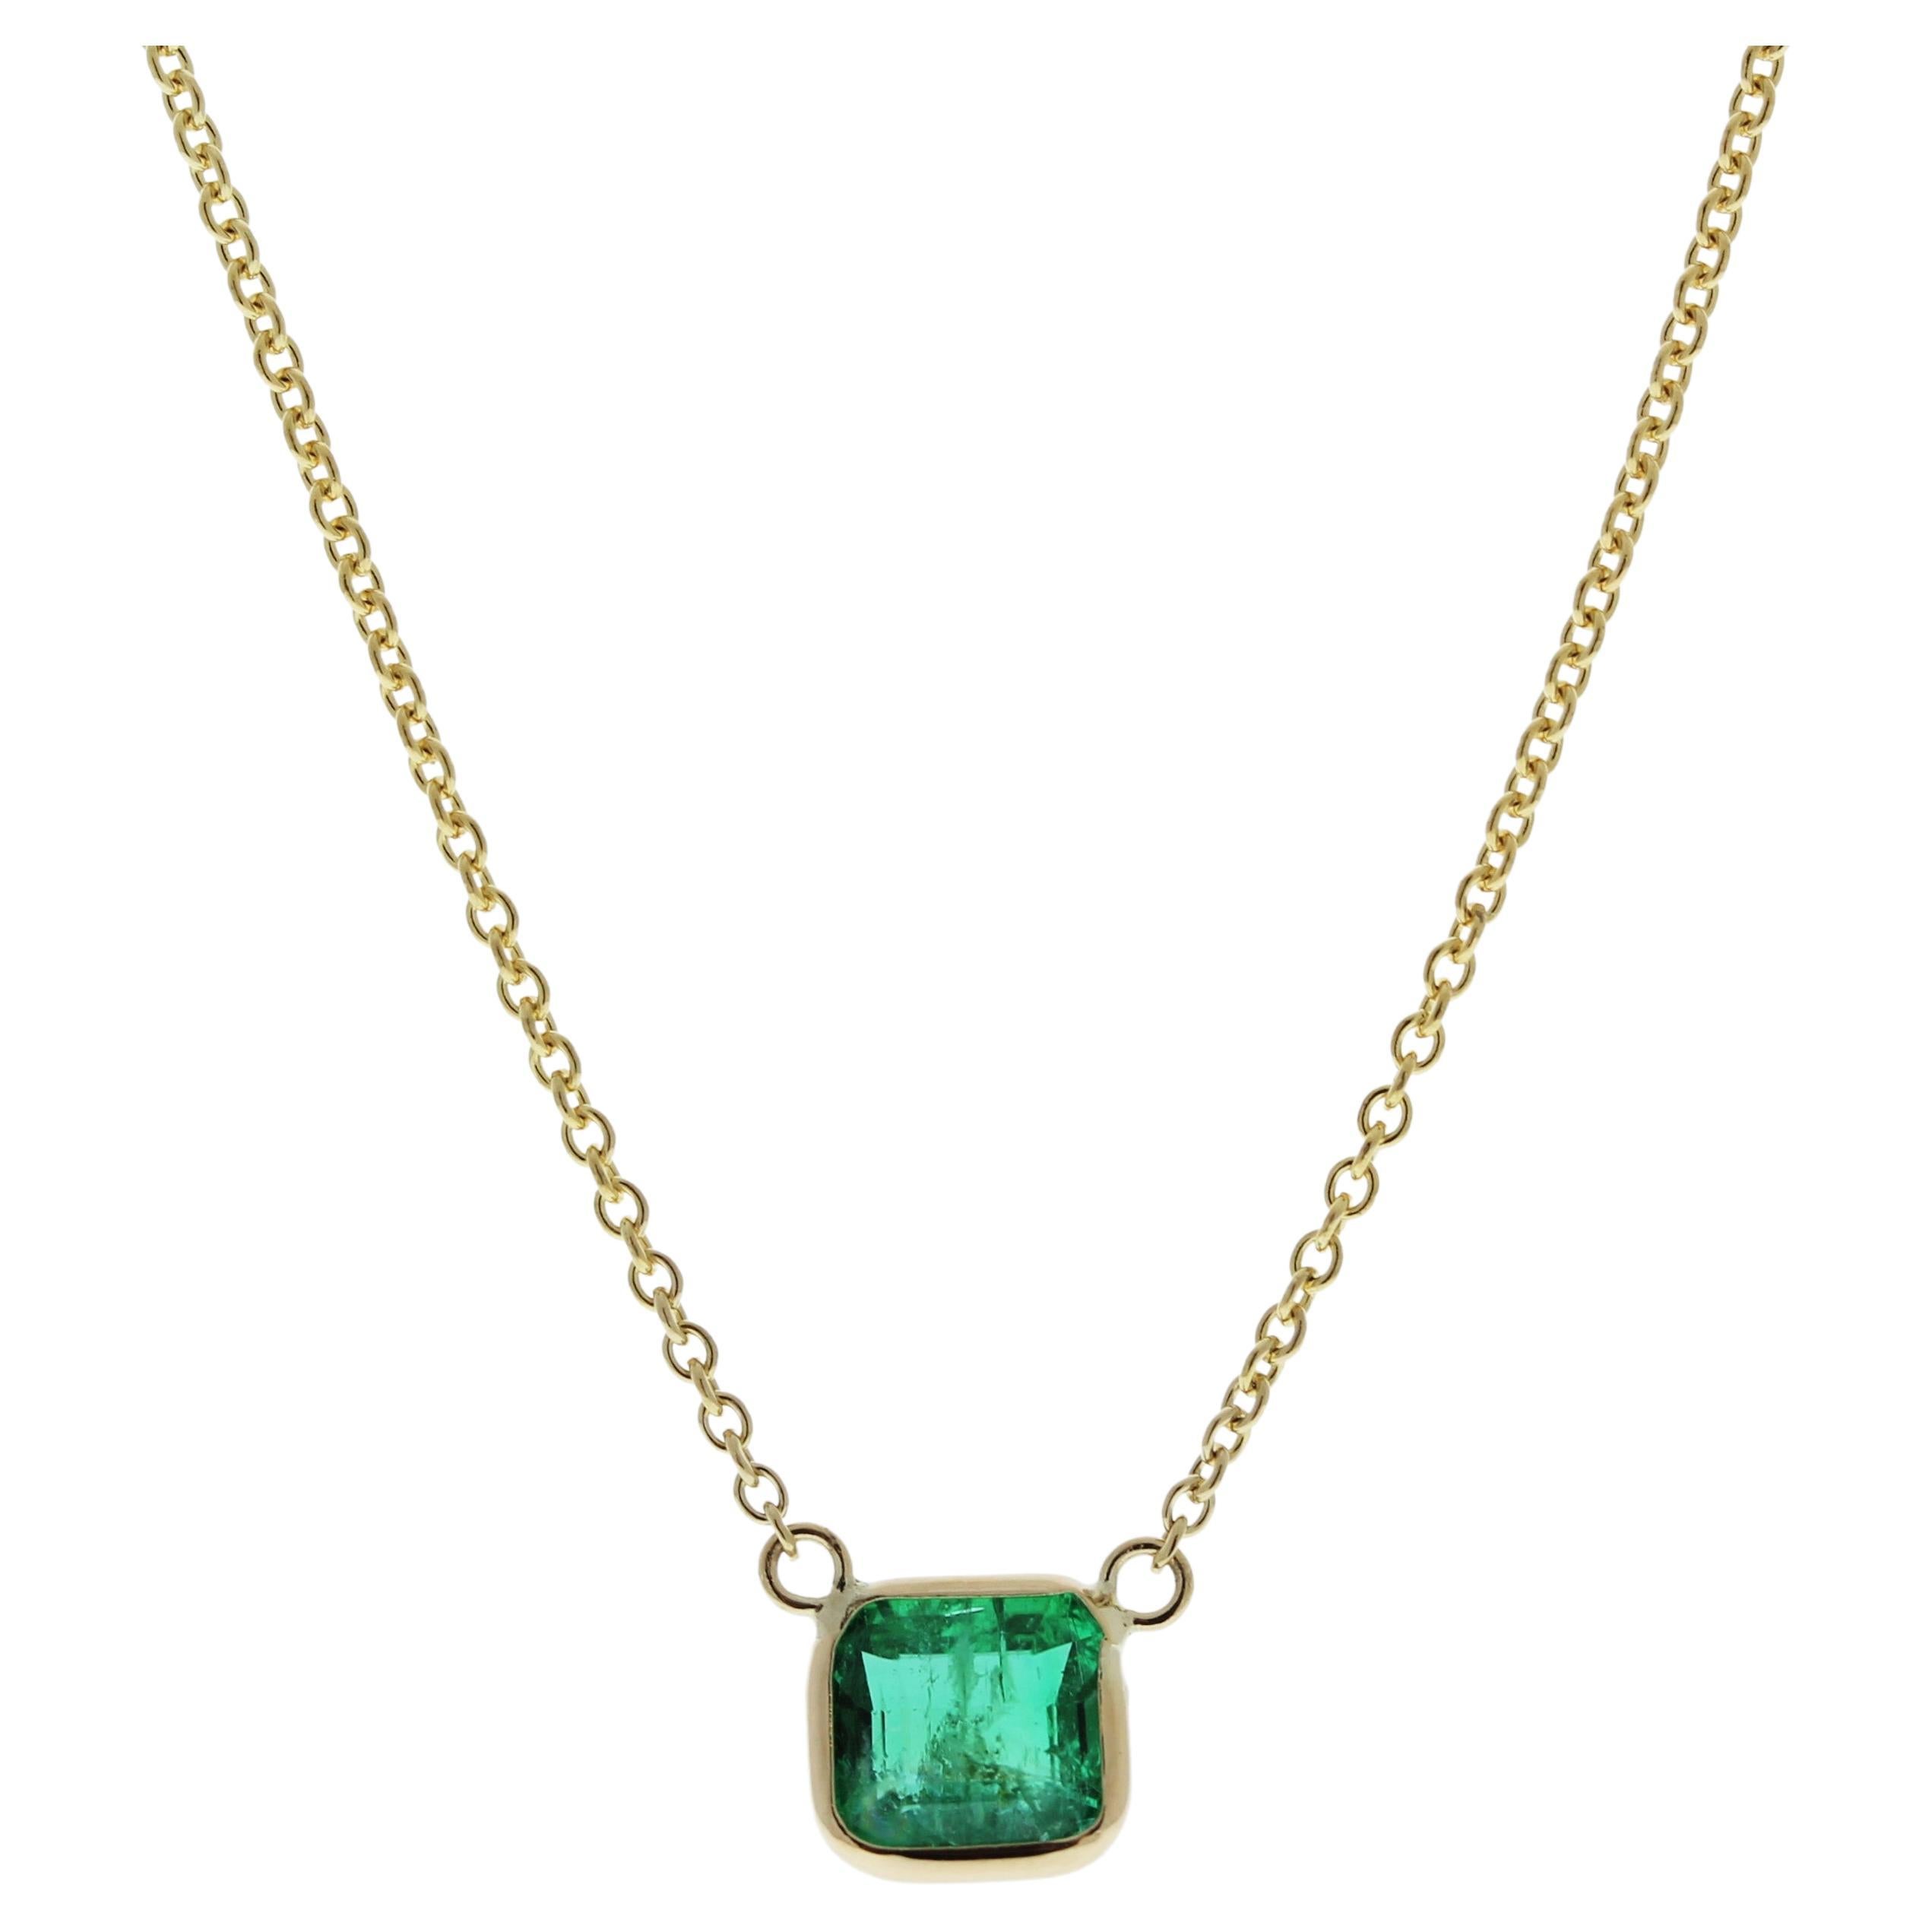 1.04 Carat Asscher Emerald Green Fashion Necklaces In 14k Yellow Gold